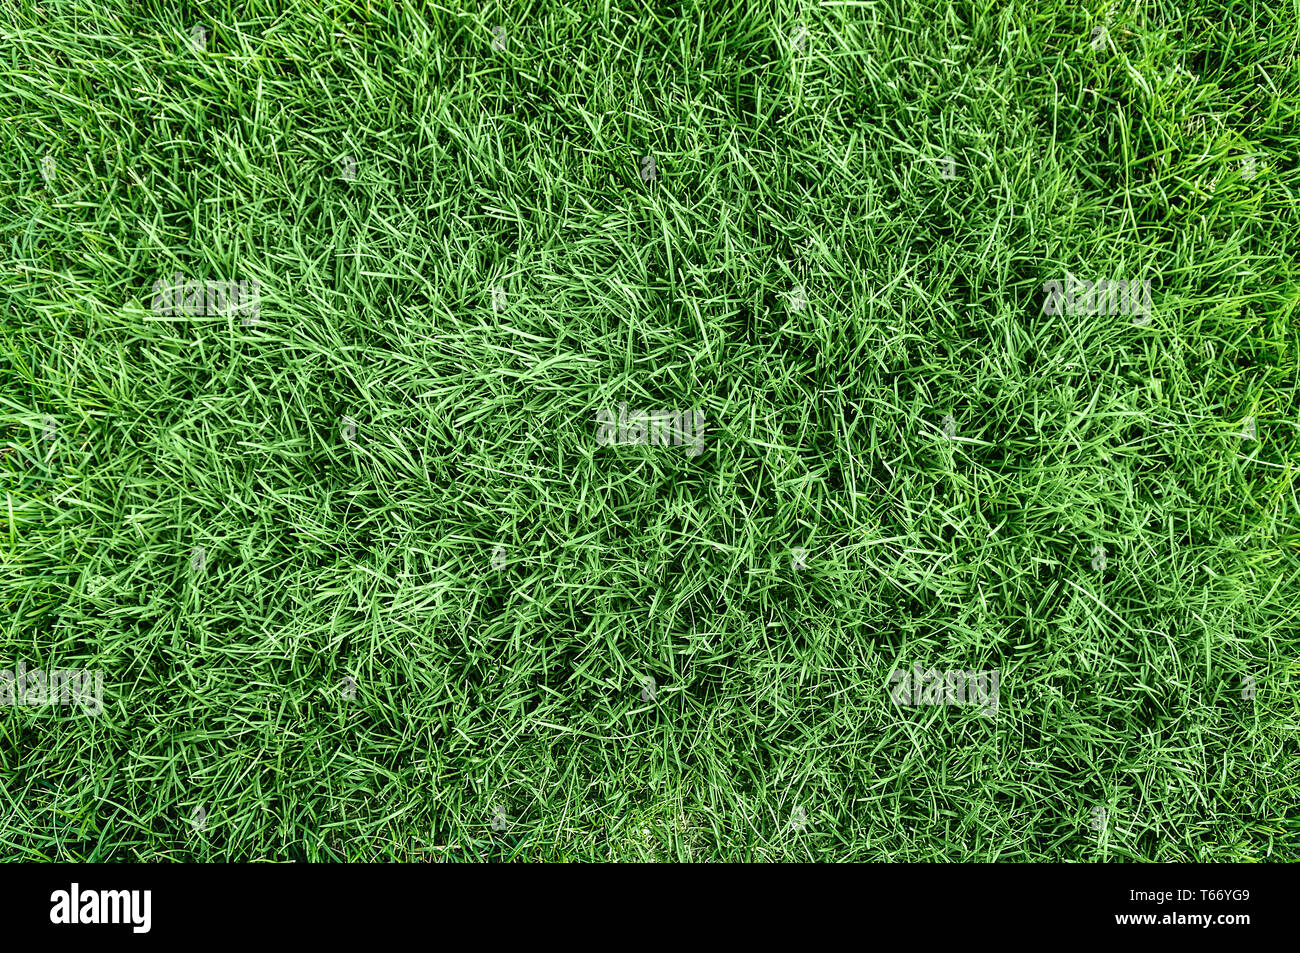 Nature green grass background top view Stock Photo